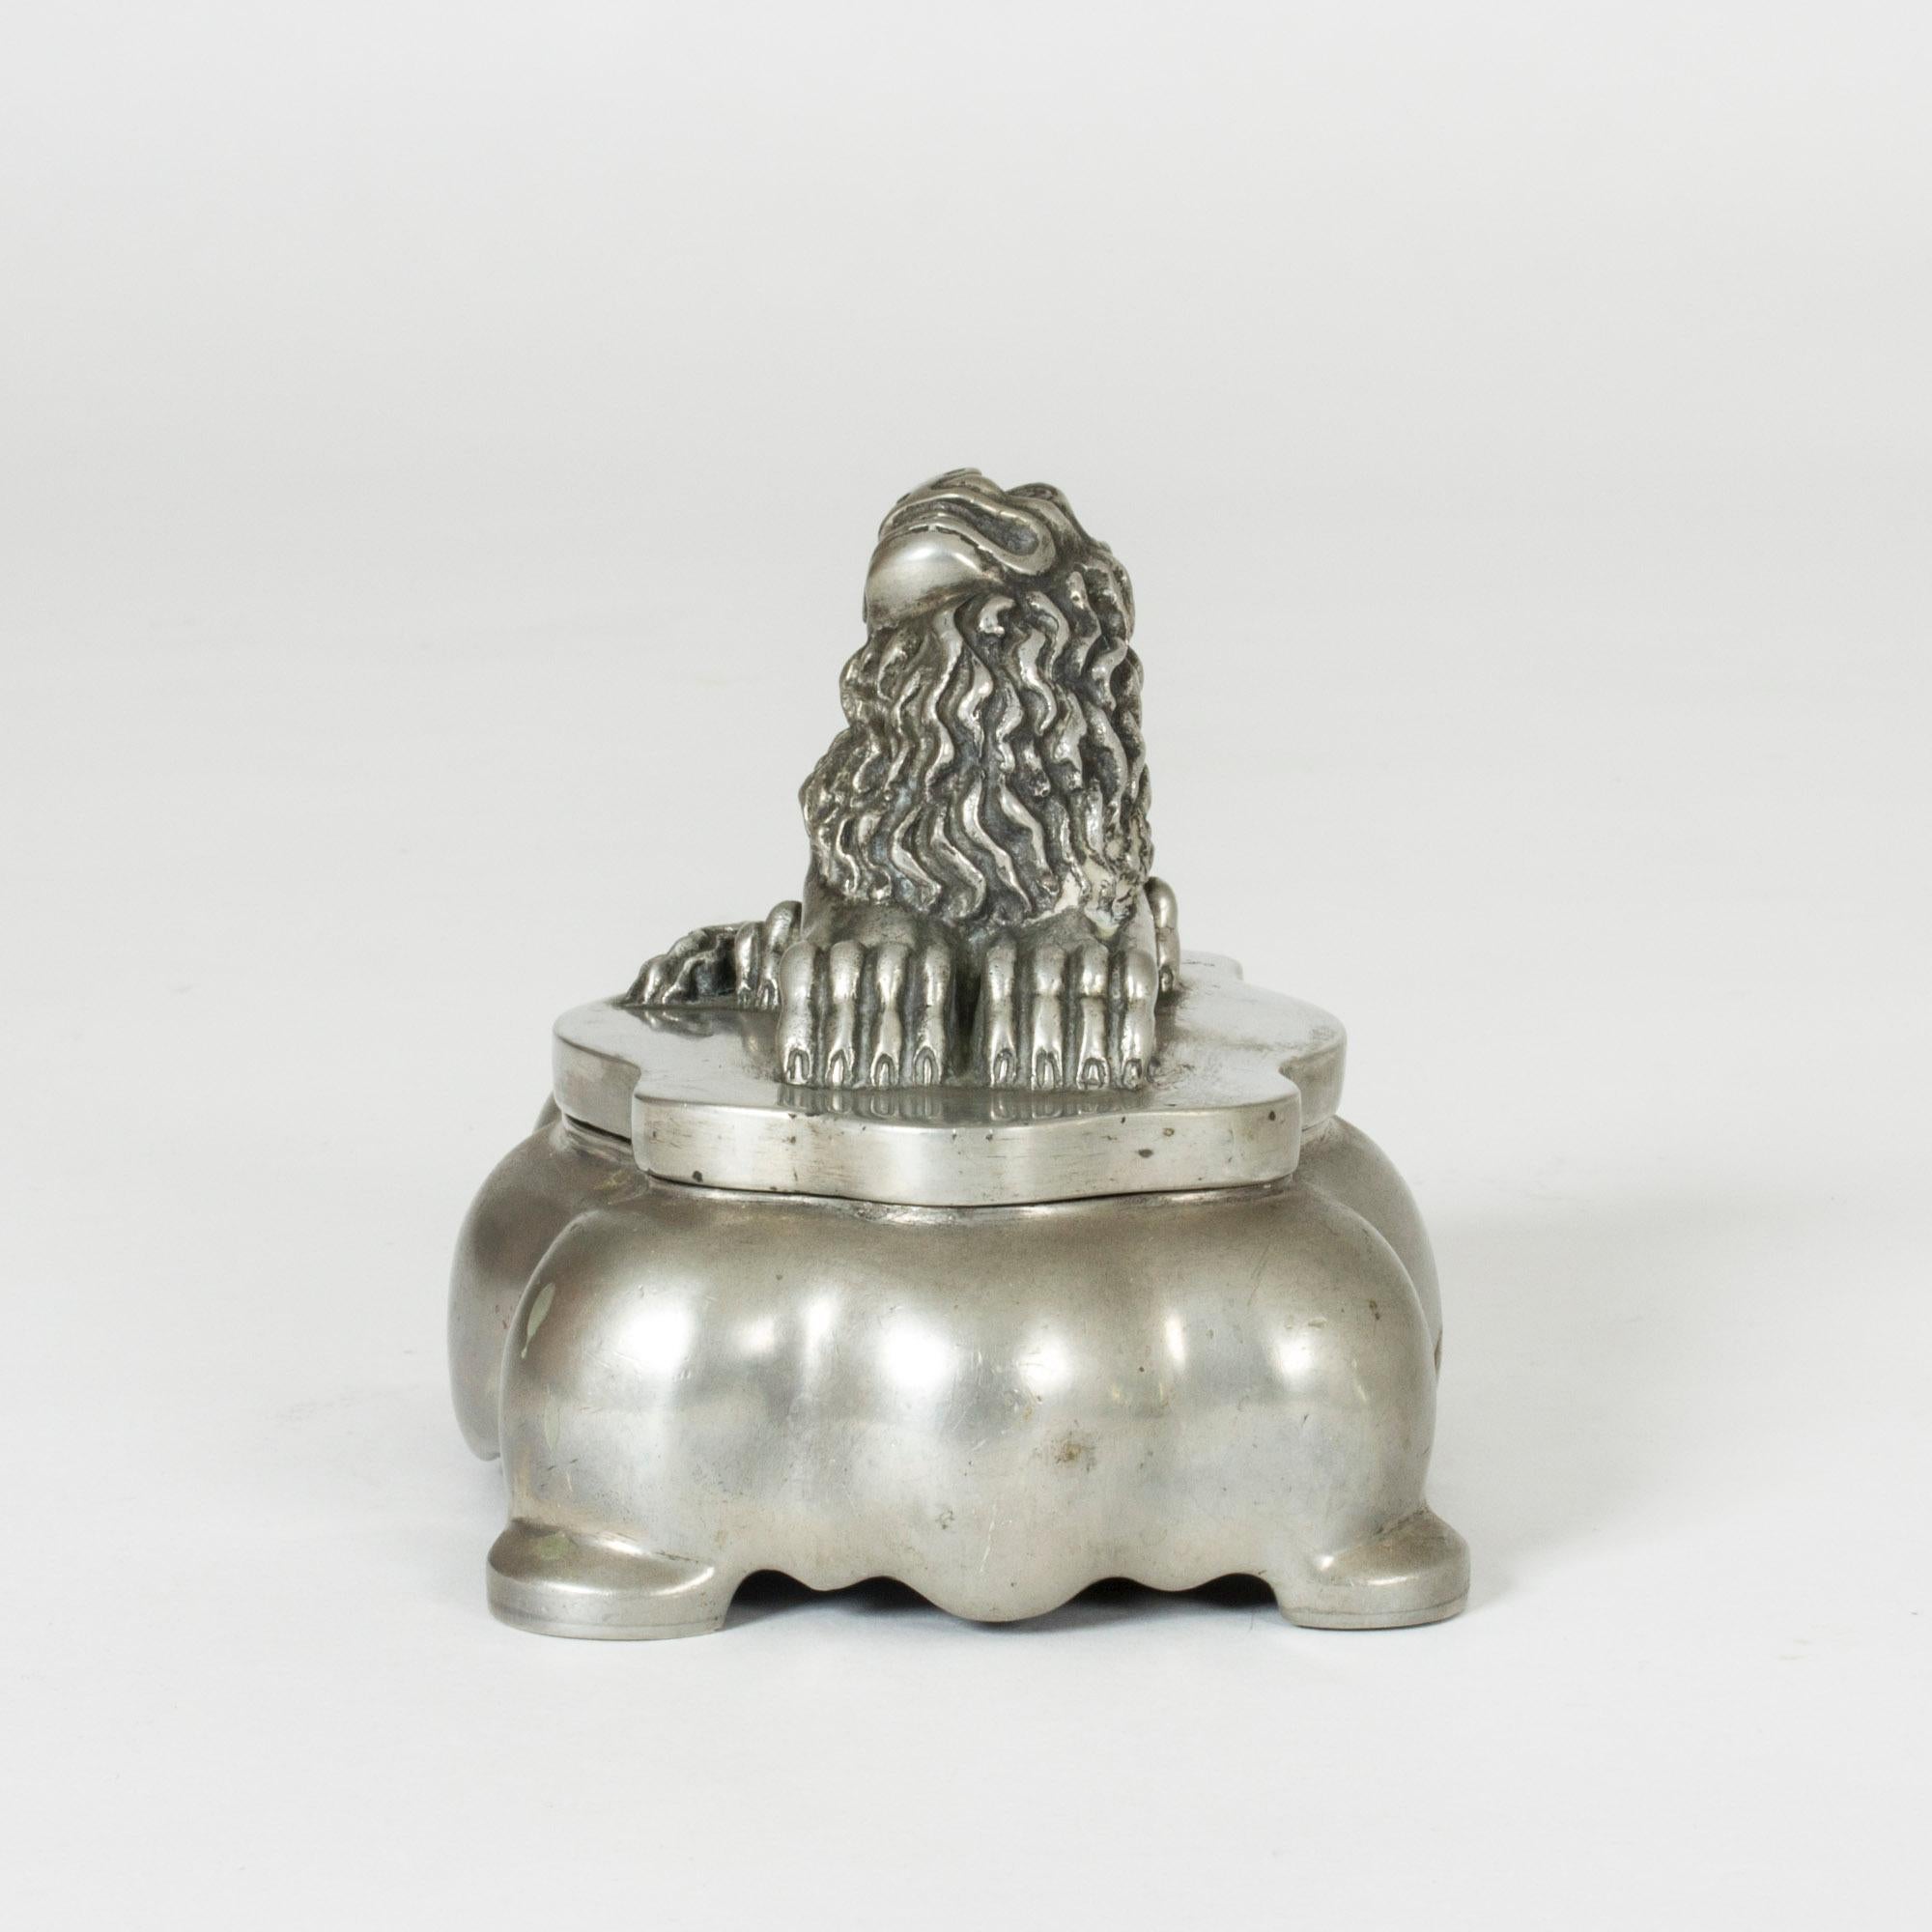 Pewter inkwell by Anna Petrus, designed in the period 1925-1927. Adorned with the expressive lion that is one of Petrus’ signature designs. Loose glass insets in the indentures made for ink.

Anna Petrus was a Swedish sculptor, Industrial designer